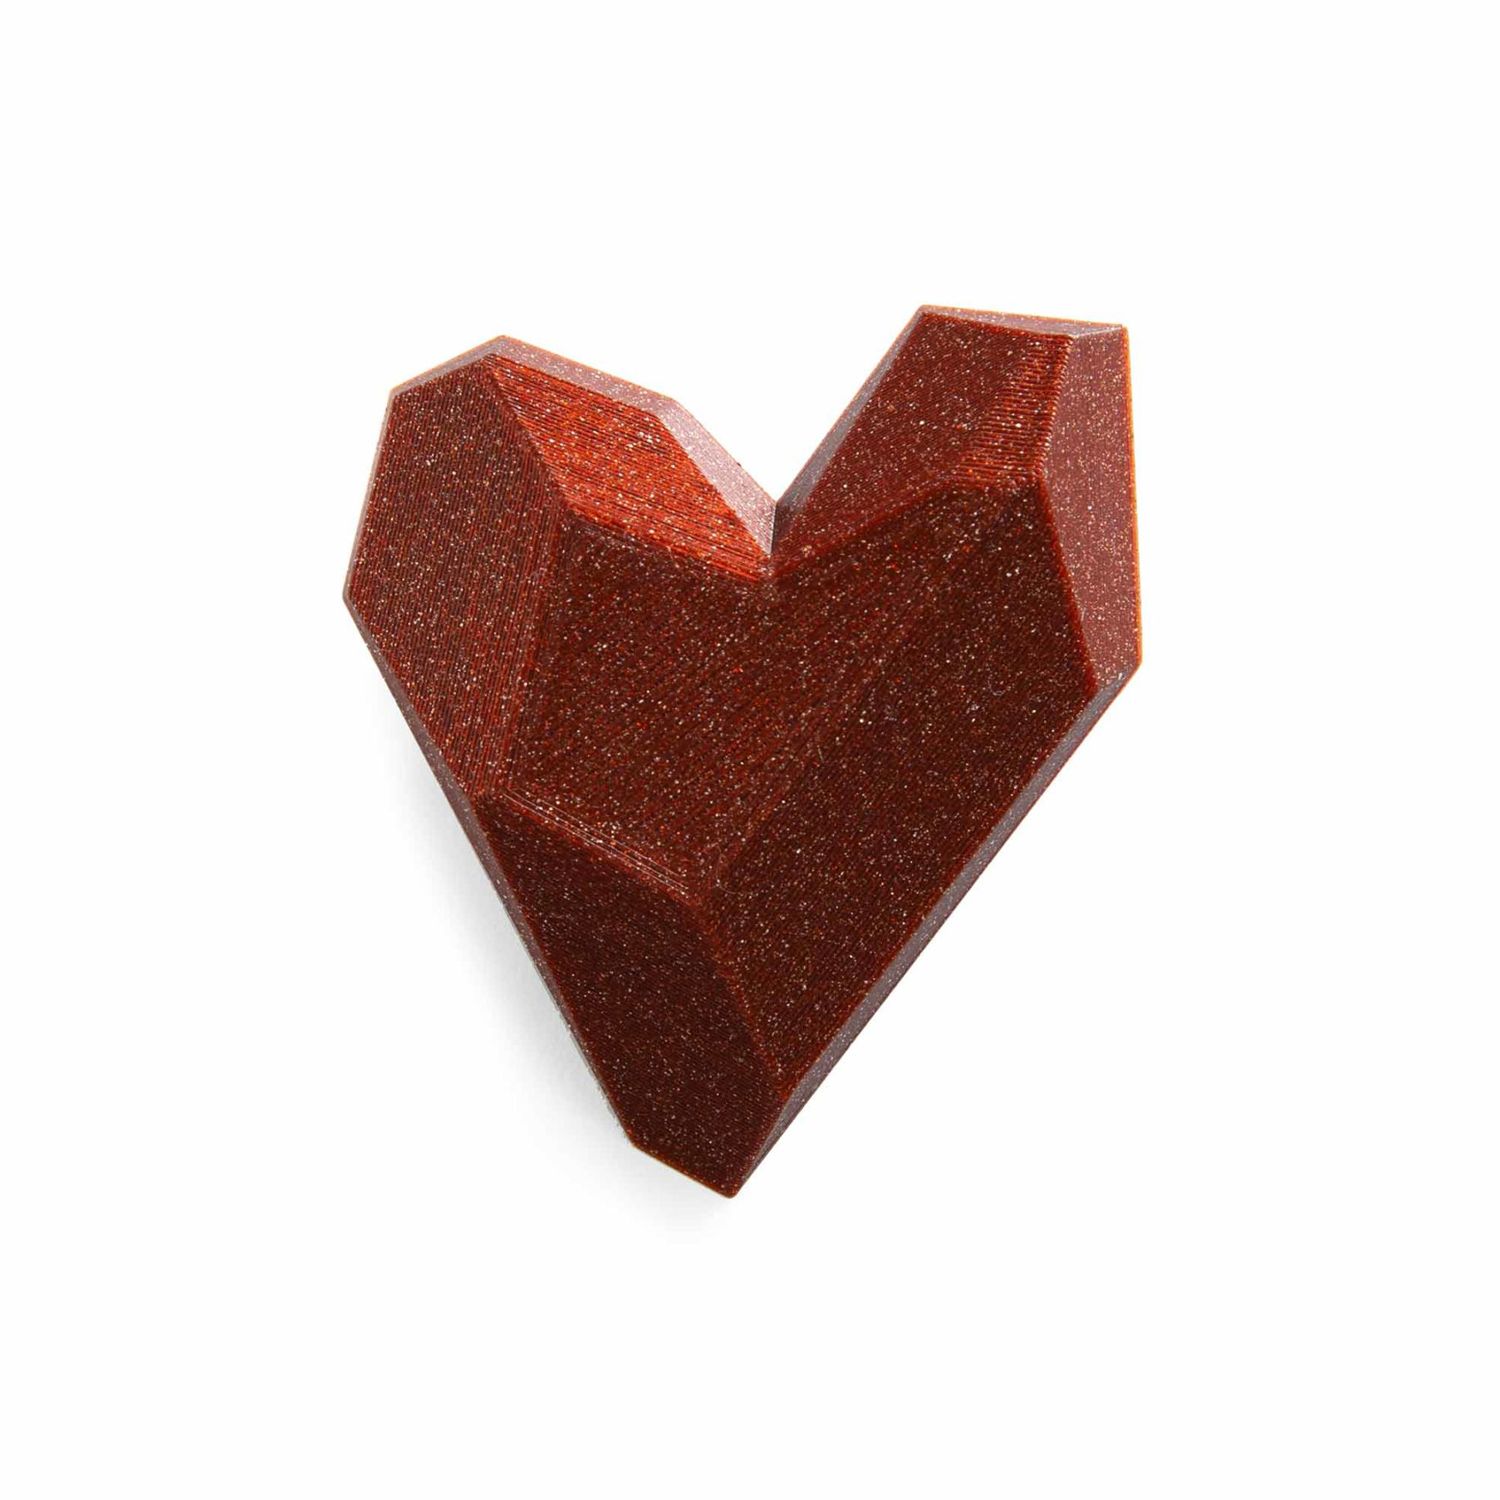 Maison 203: Heart Brooch – Red Glitter Product Image 1 of 3